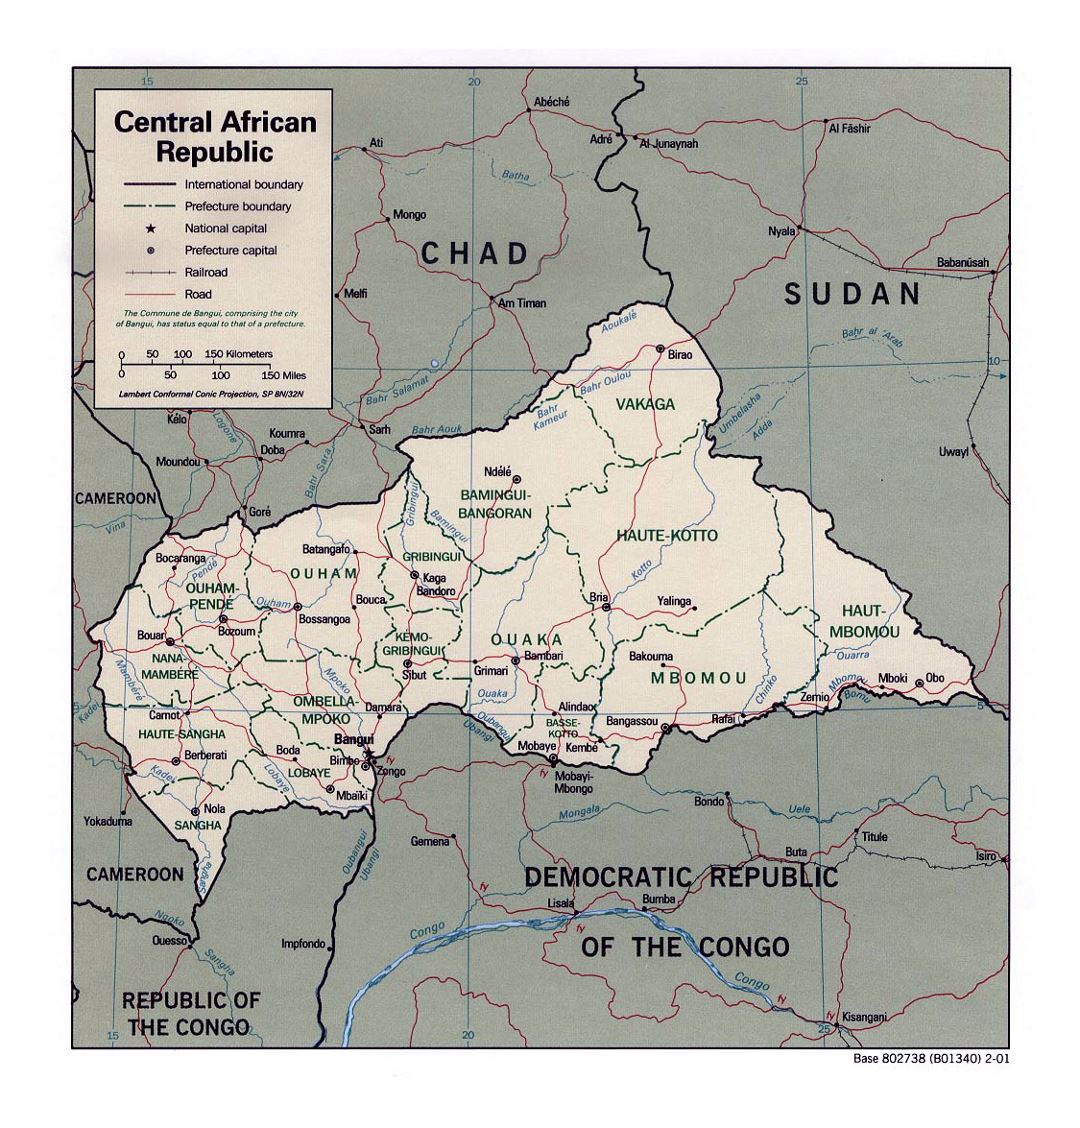 Detailed political and administrative map of Central African Republic with roads, railroads and major cities - 2001